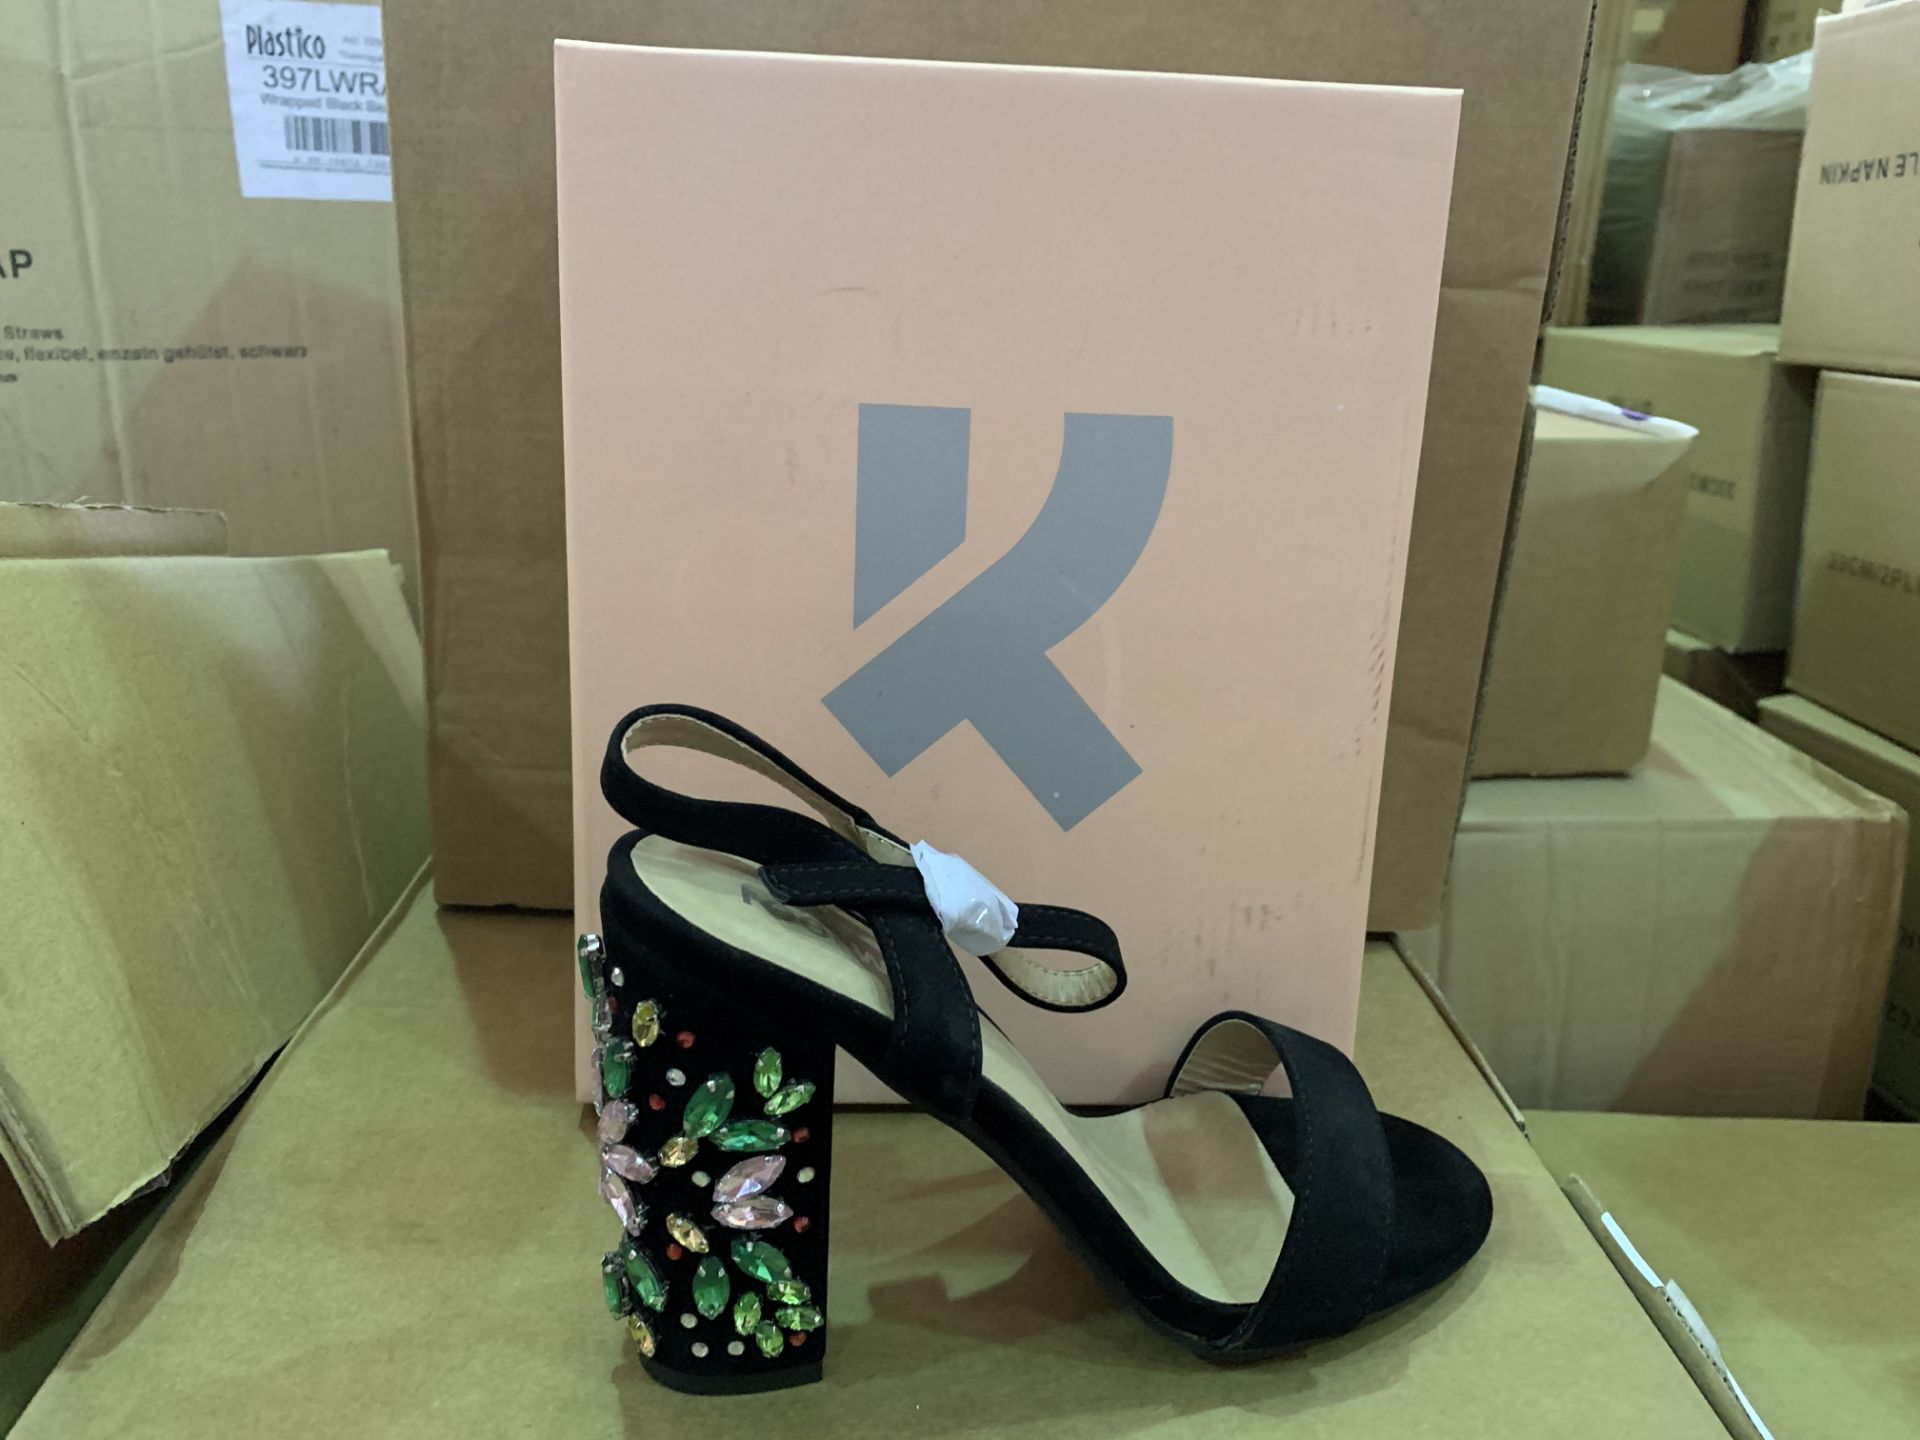 14 X BRAND NEW RETAIL BOXED KOI COUTURE BLACK SUEDE HIGH HEEL FASHION SHOES WITH JEWELLS IN RATIO